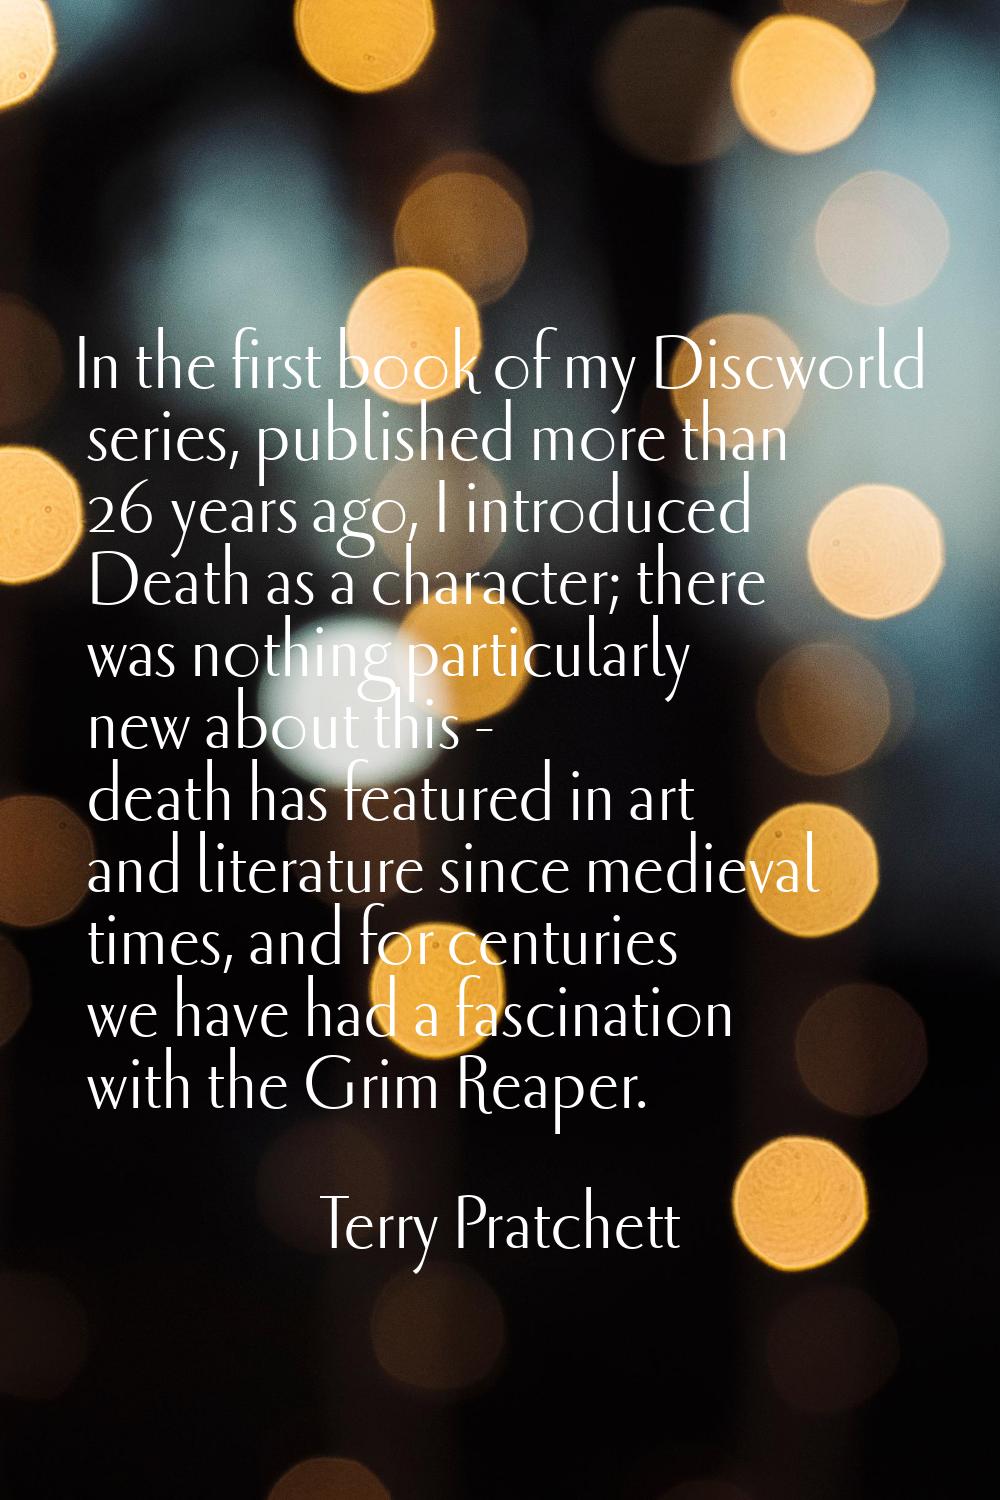 In the first book of my Discworld series, published more than 26 years ago, I introduced Death as a